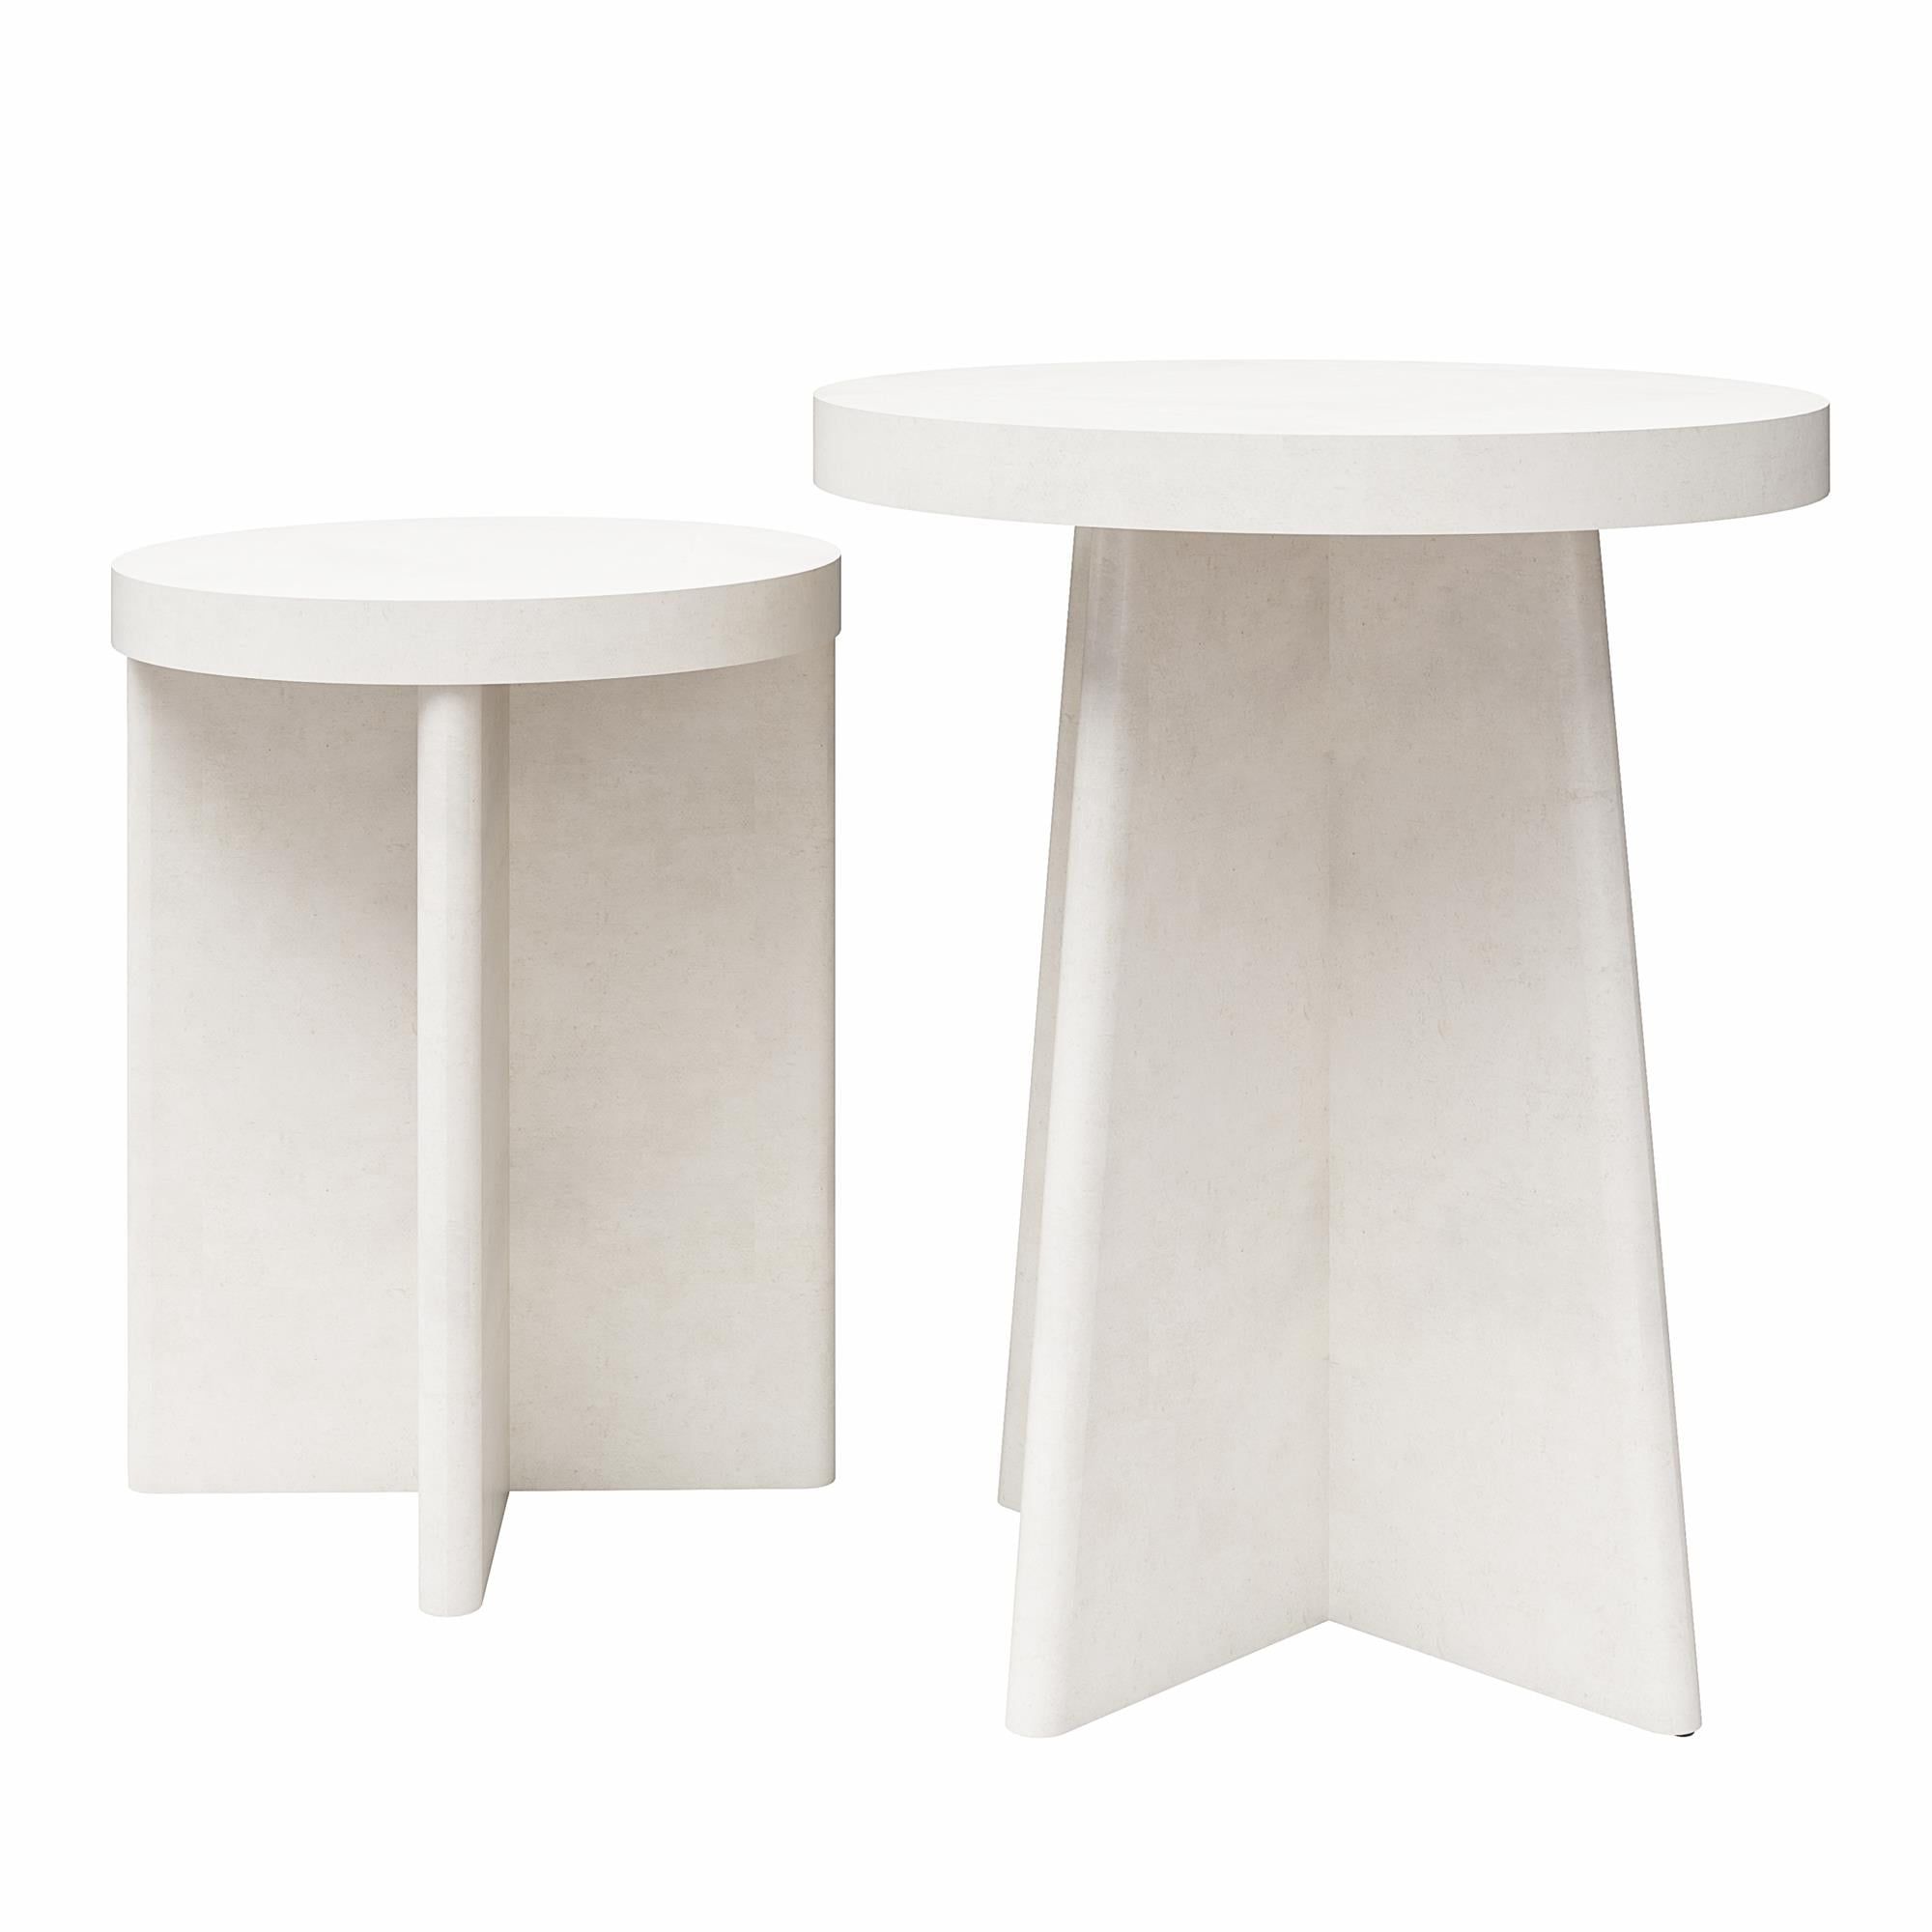 Queer Eye Liam Round End Tables, Set Of 2, Plaster – Walmart Inside Liam Round Plaster Coffee Tables (View 16 of 20)